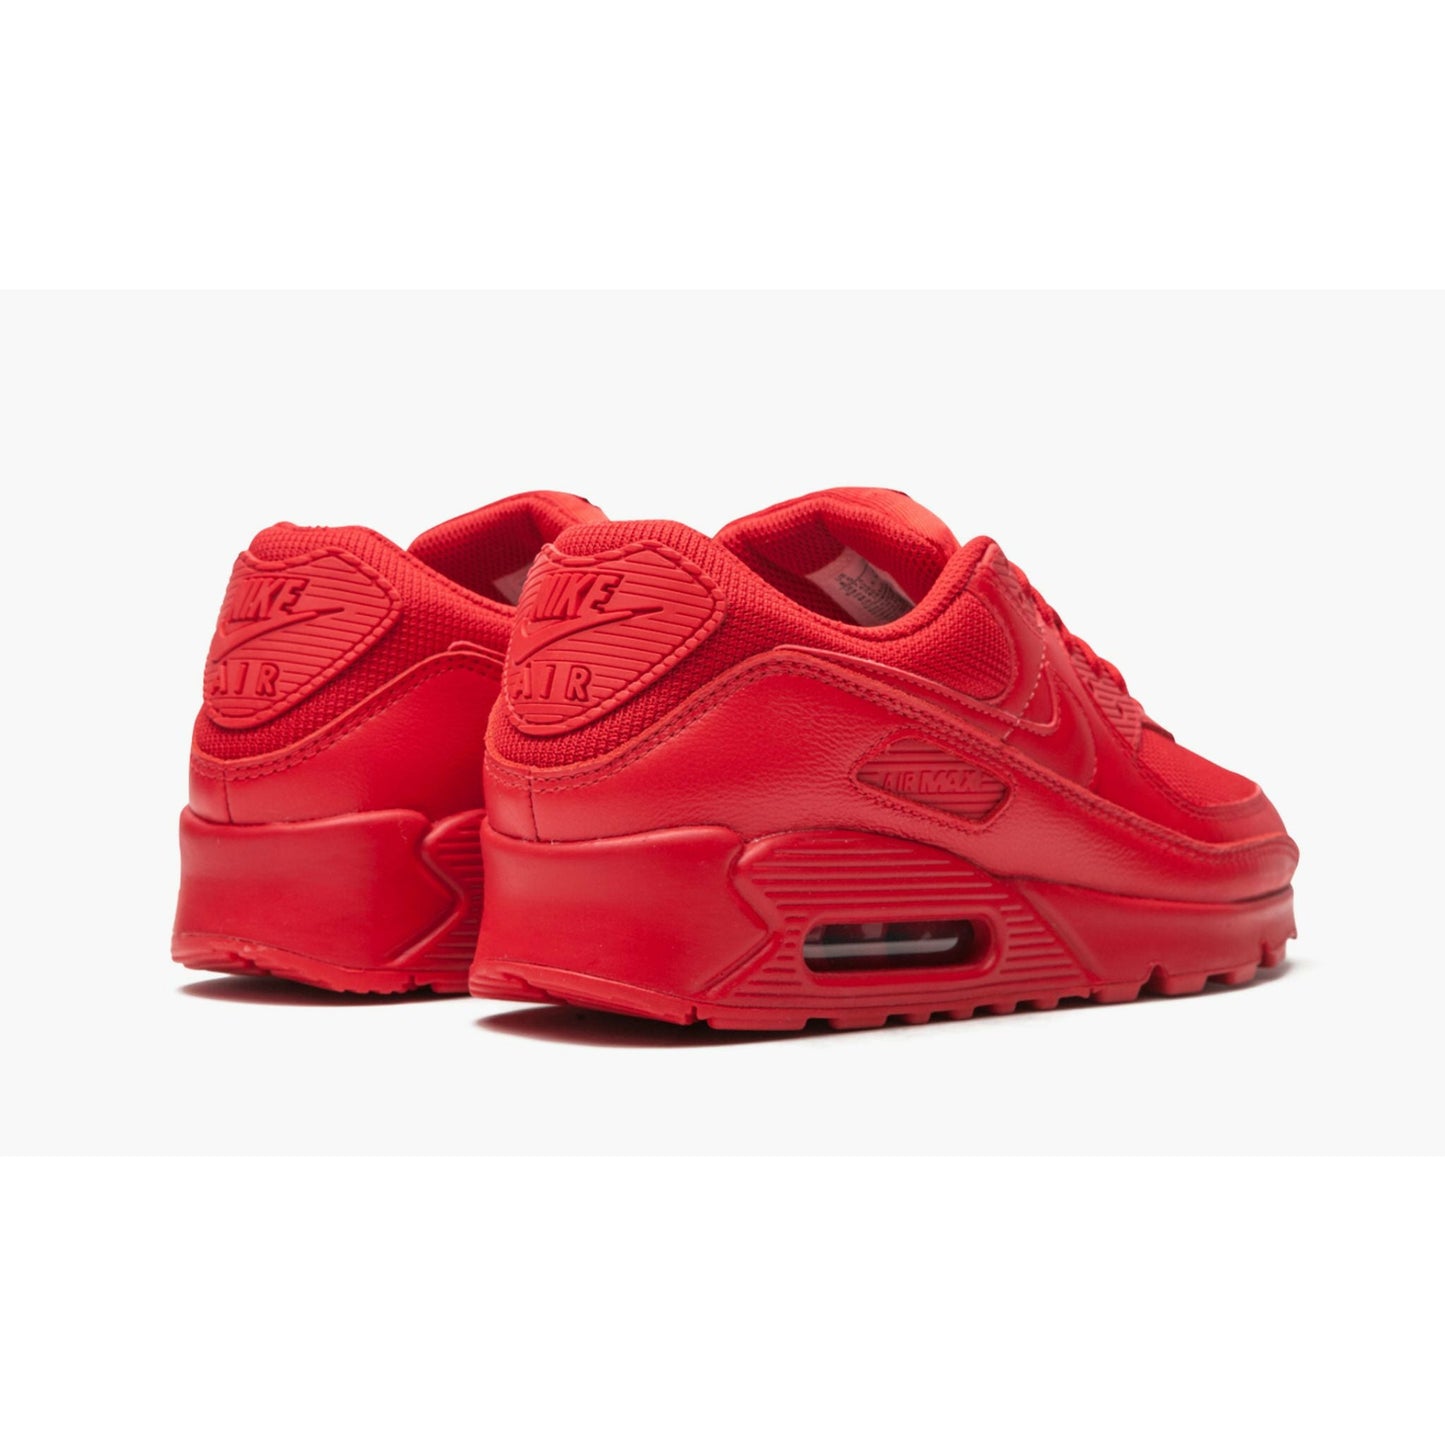 Nike Air Max 90 City Special Chicago Red DH0146-600